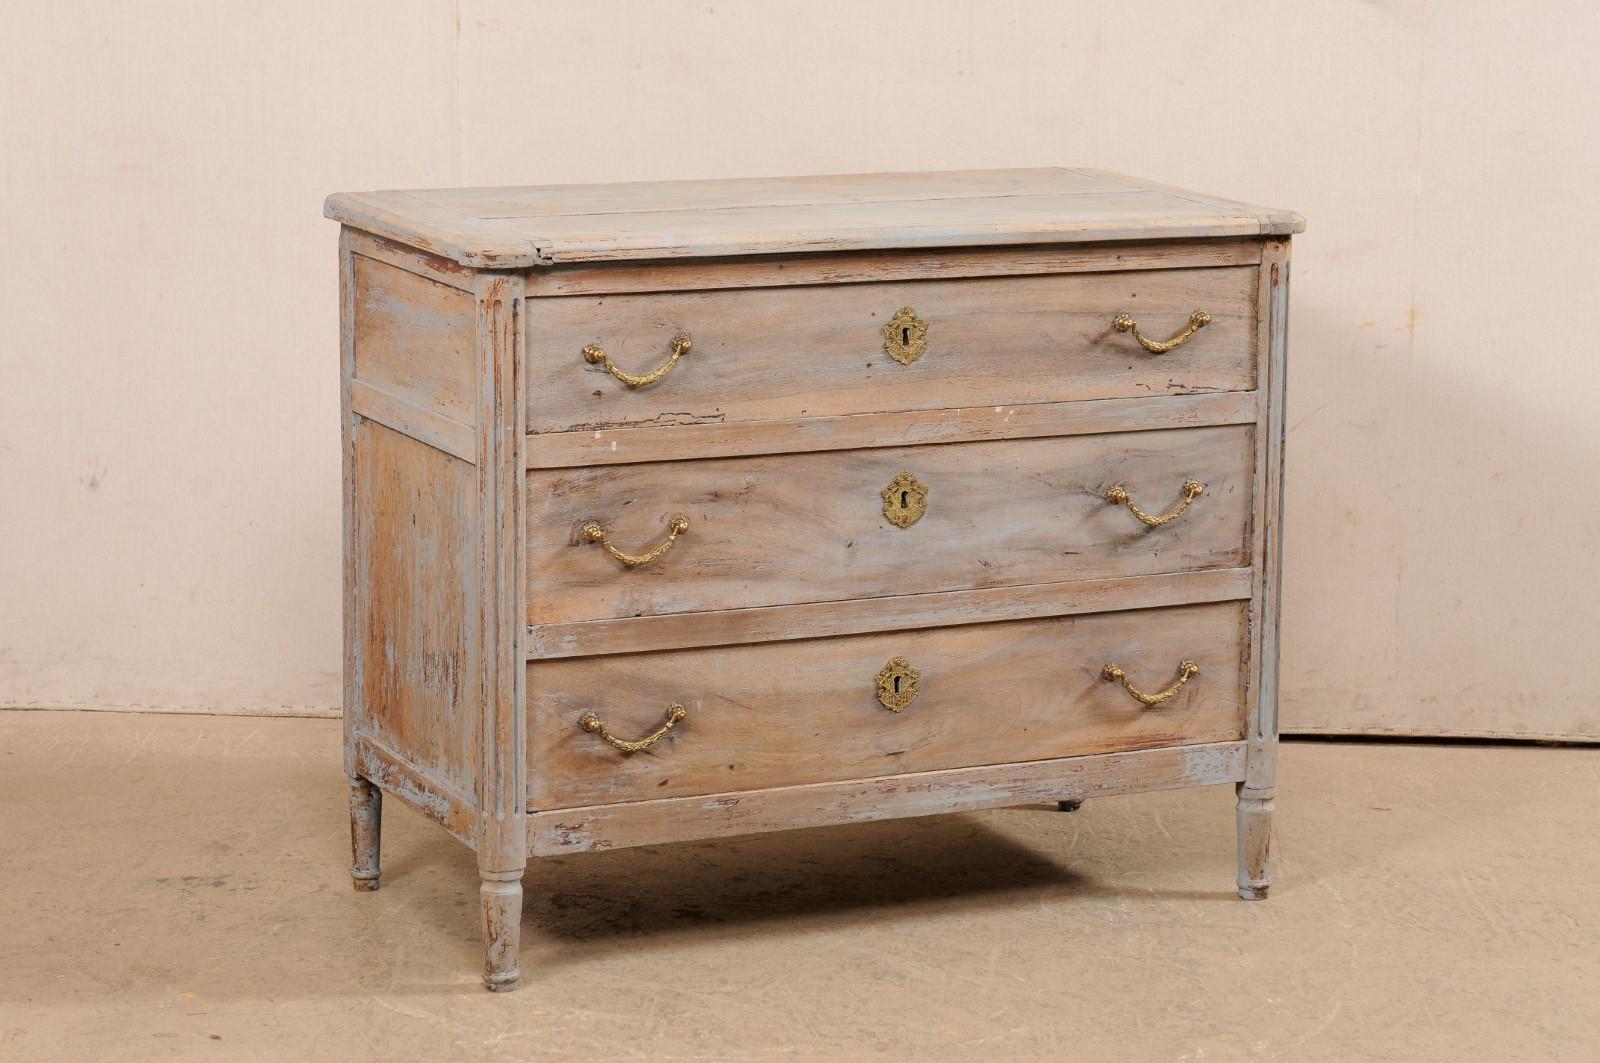 A French Neoclassic commode, with scraped finish, from the 19th century. This antique chest from France features a rectangular-shaped top with pronounced and rounded corners, which rests atop a neoclassical style case which houses three graduated